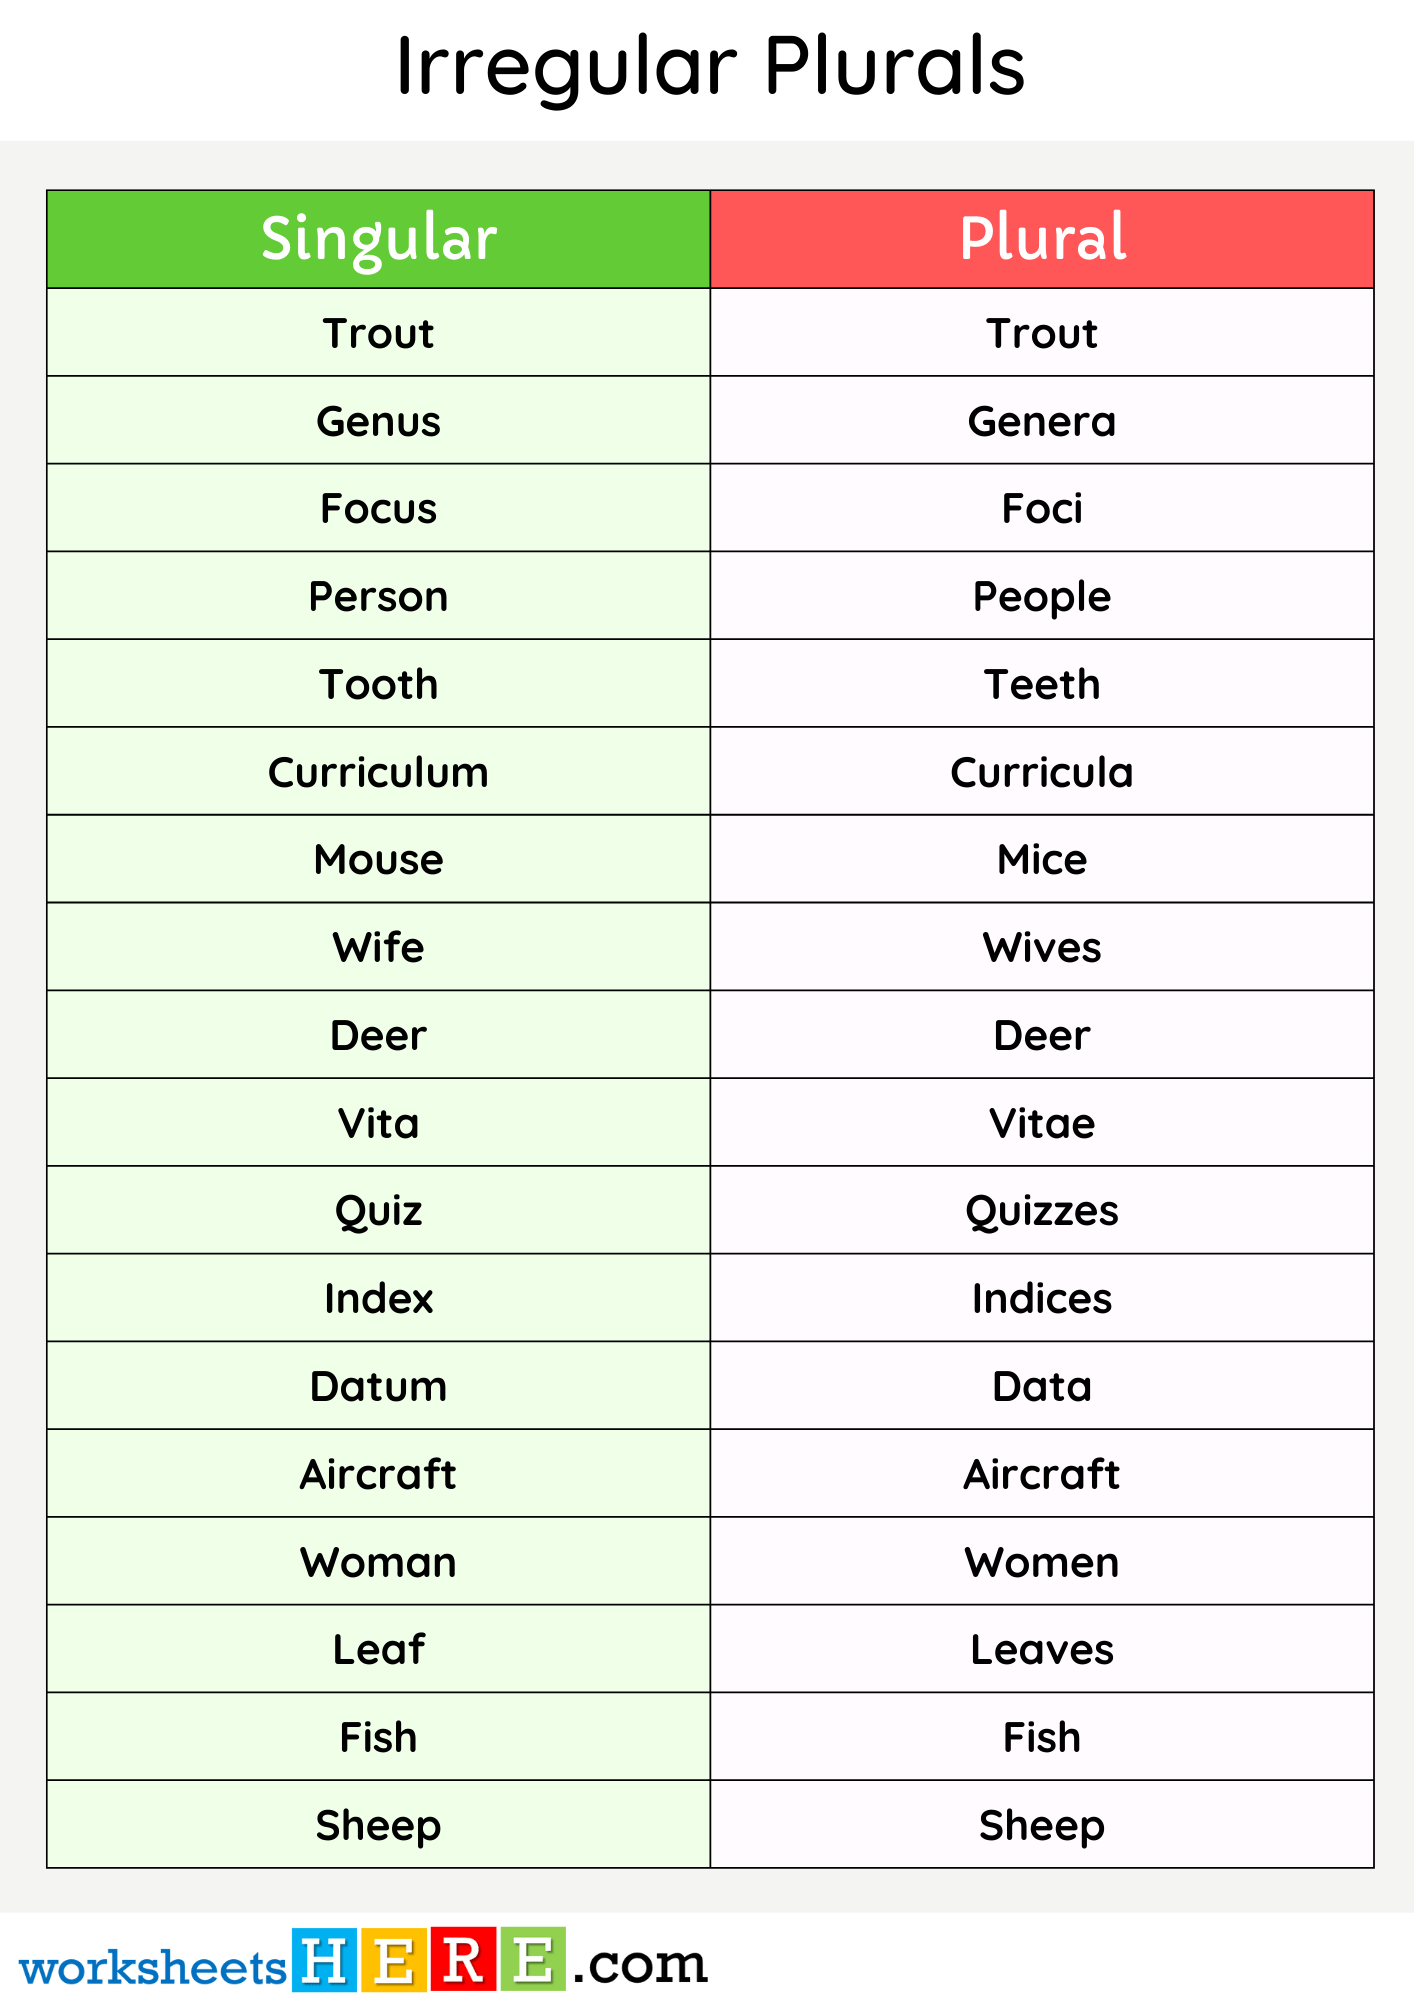 Irregular Plurals List Examples PDF Worksheet For Students and Kids